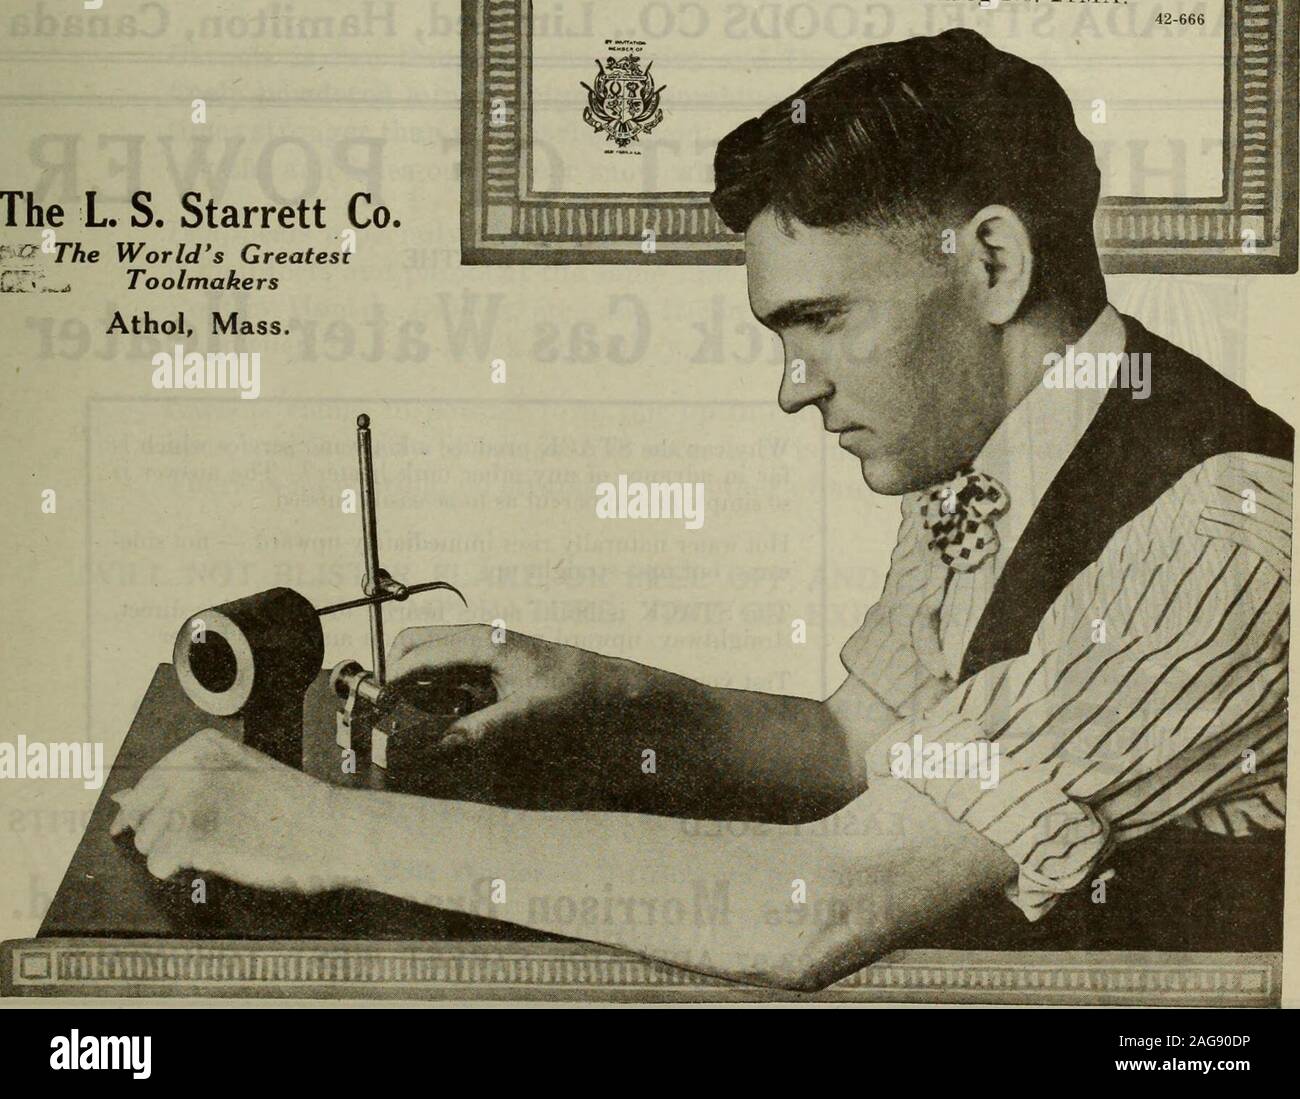 . Hardware merchandising March-June 1917. The L. S. Starrett Co. t The Worlds Greatest * Toolmakers Athol, Mass. 1IIIHIHIiir)IIIIIIIIflllHIfffflinf!lffIIIif||lf|lllHfffUII HERE is the most useful measur-ing instrument which machinistsneed in laying out their work. Itis an easy tool to sell because of thecomplicated layouts which are con-stantly arising nowadays in metalmanufacturing. Because of its variety of uses, mosttool-makers and machinists want the StaYvett »e* u * mx on. Surface Gage for scribing lines on the work. This gage maybe used on all kinds of surfaces. Starrettsurface gages are Stock Photo